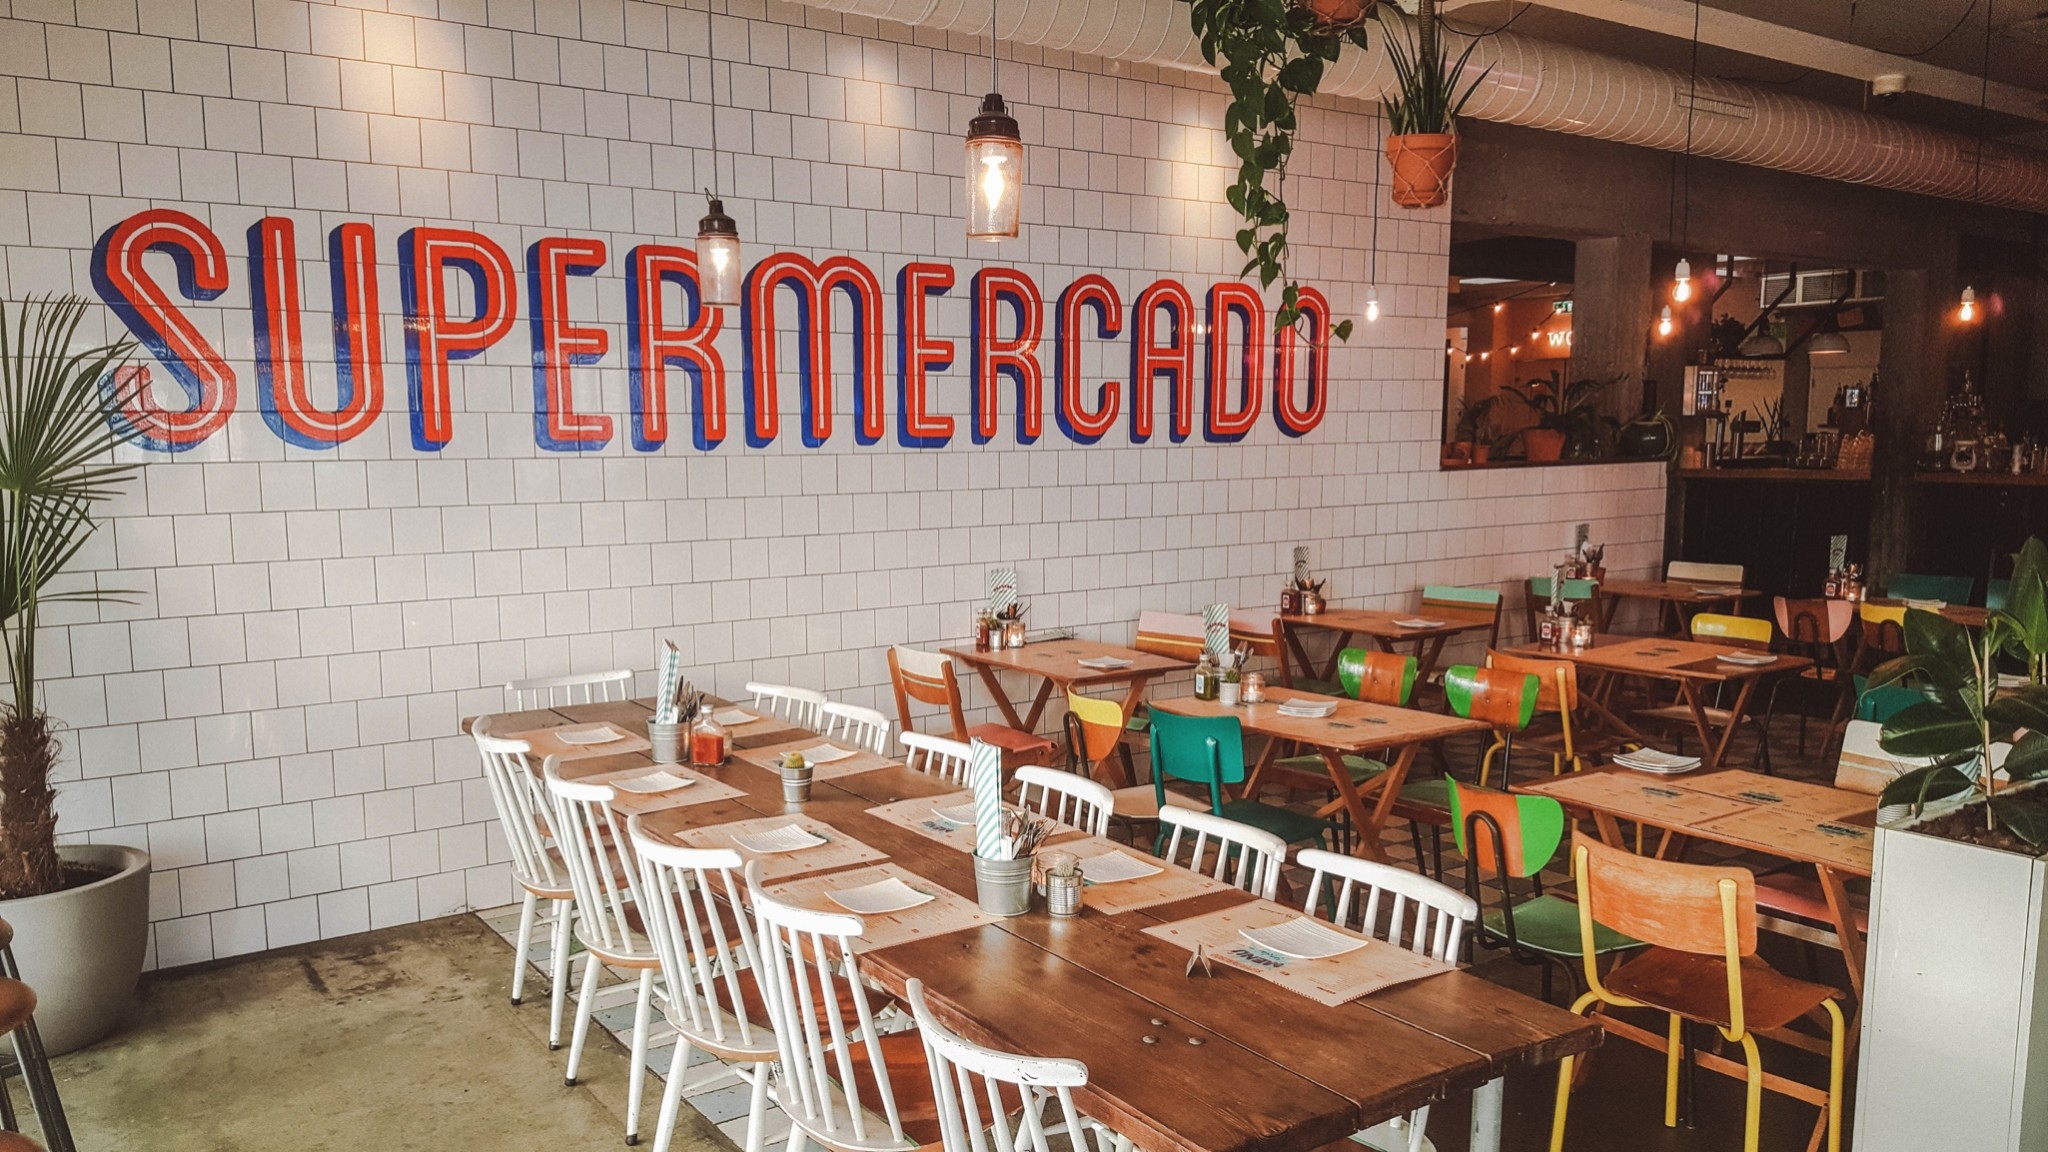 SUPERMERCADO ROTTERDAM: FOR ALL YOUR LATIN AMERICAN STREETFOOD